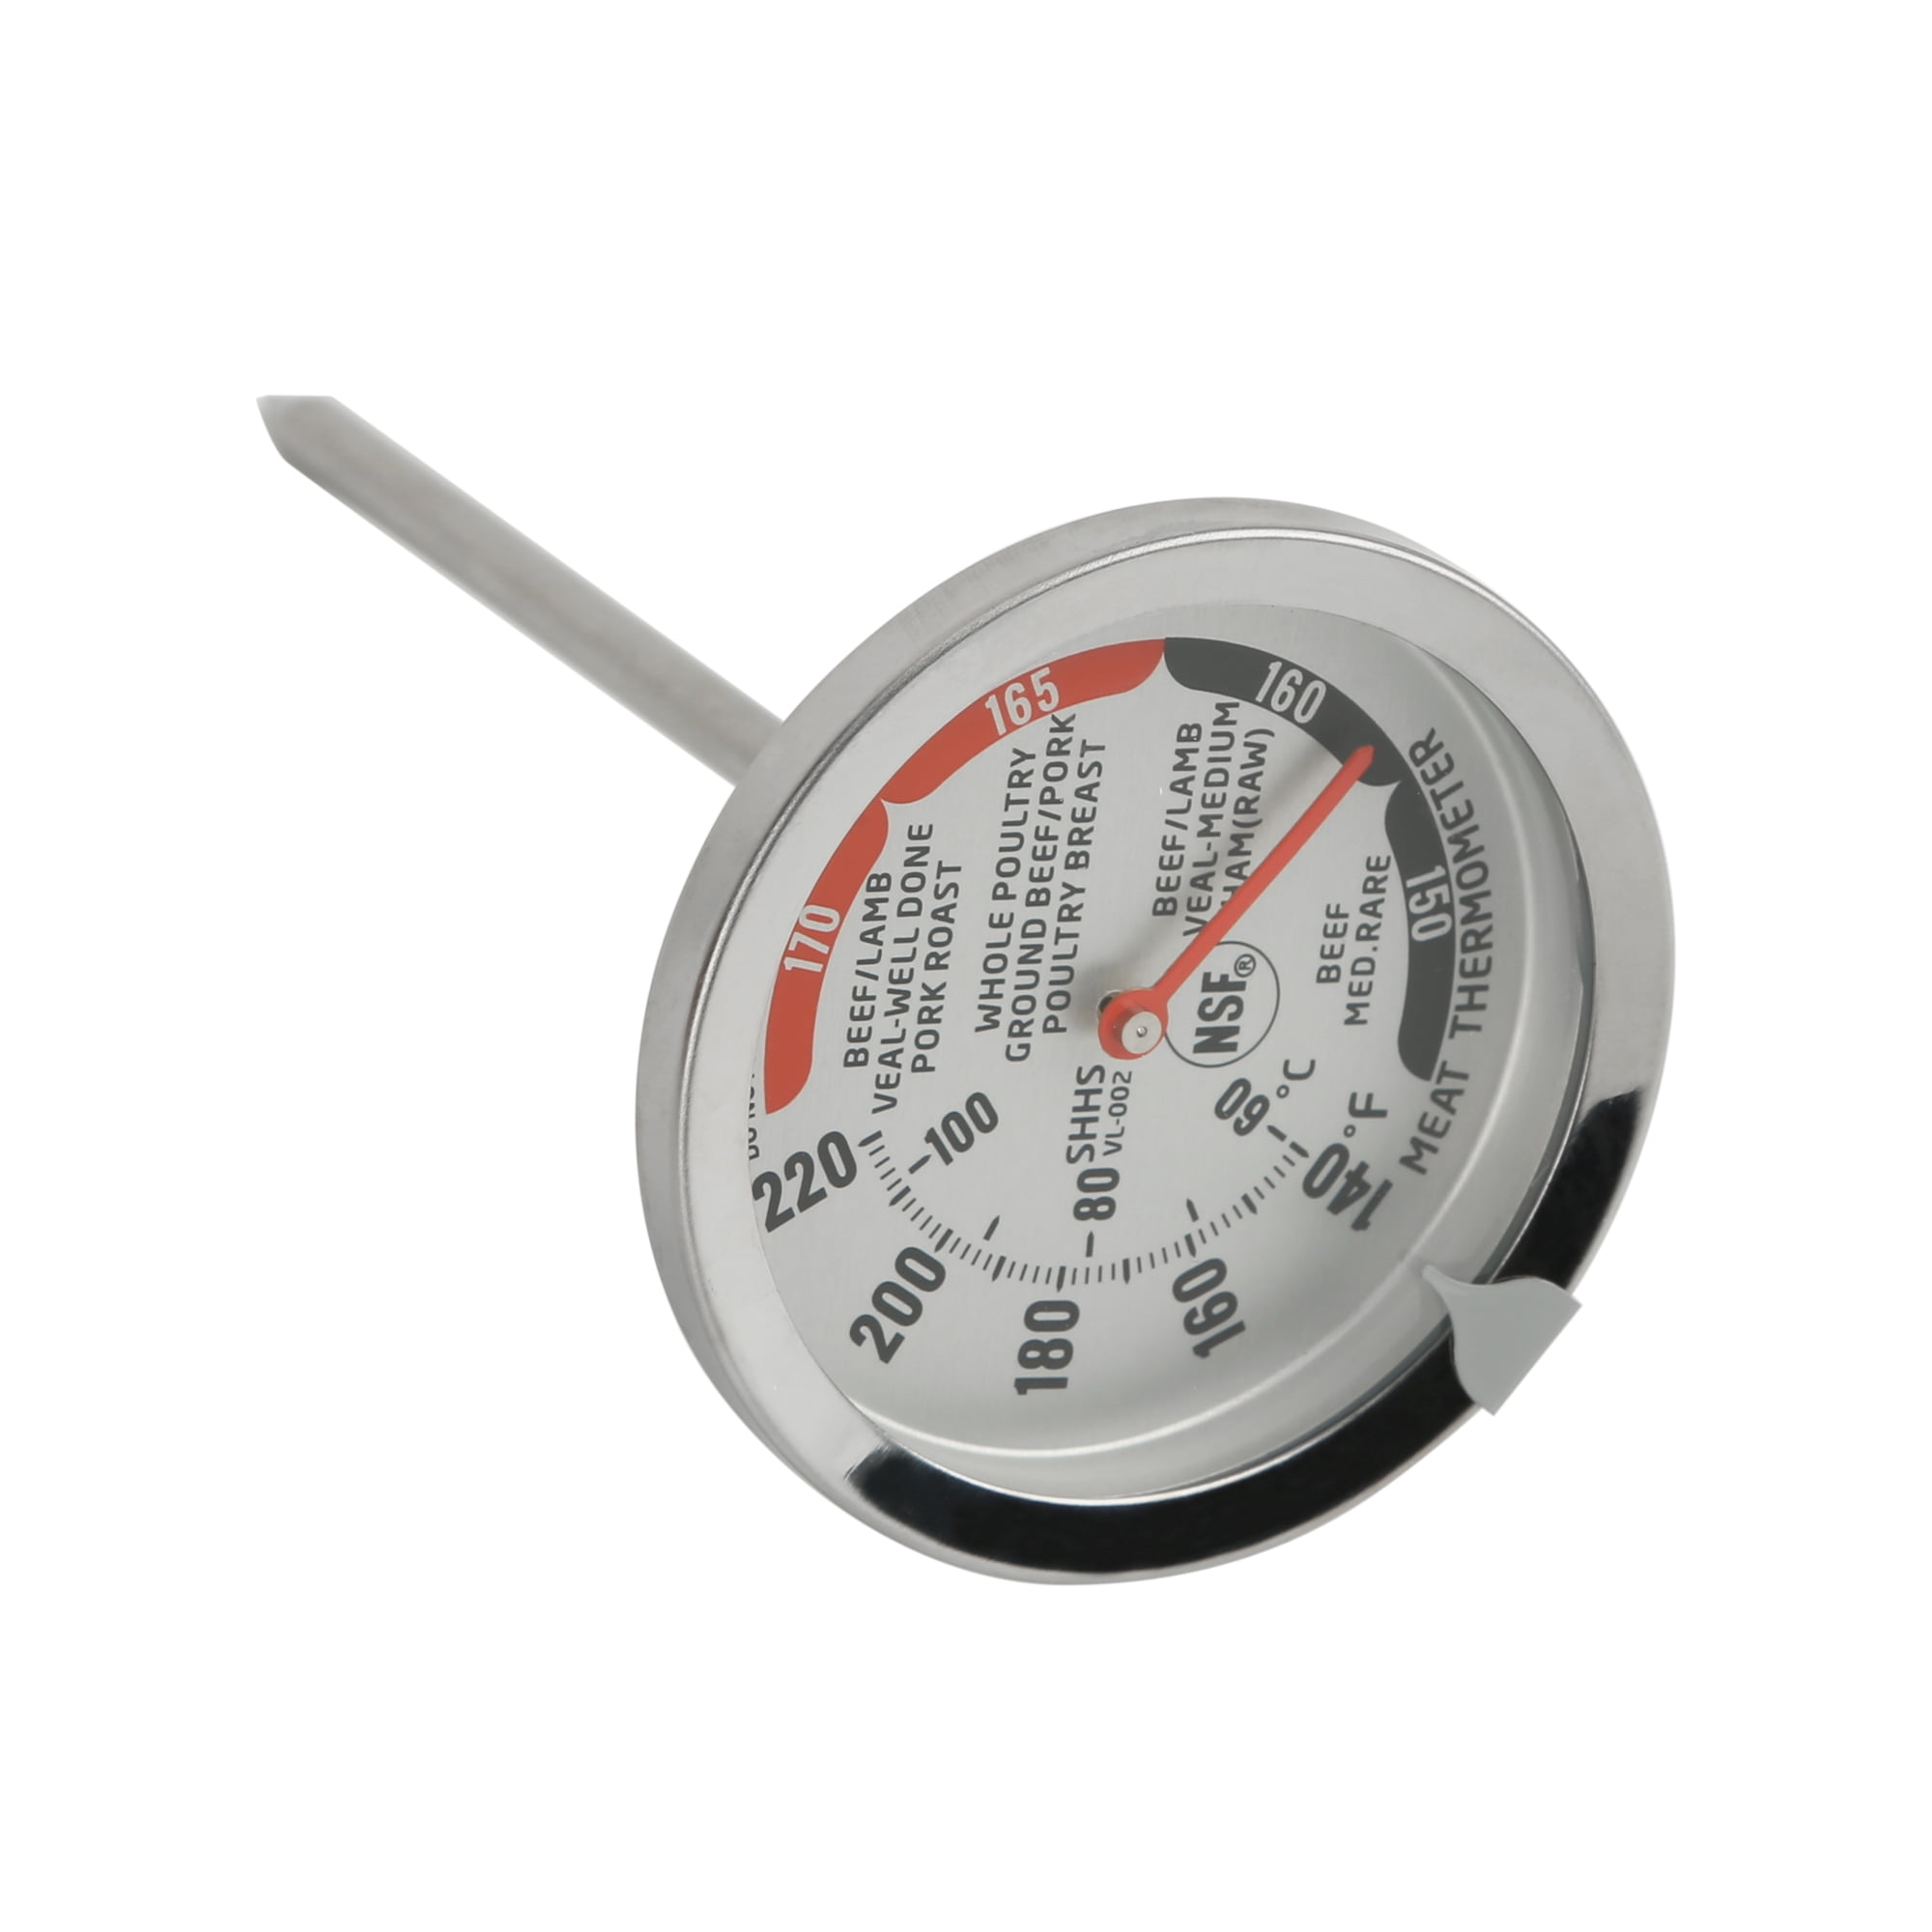 Mainstays Oven Safe Meat Thermometer, Dishwasher Safe Extra Large Dial,  Silver